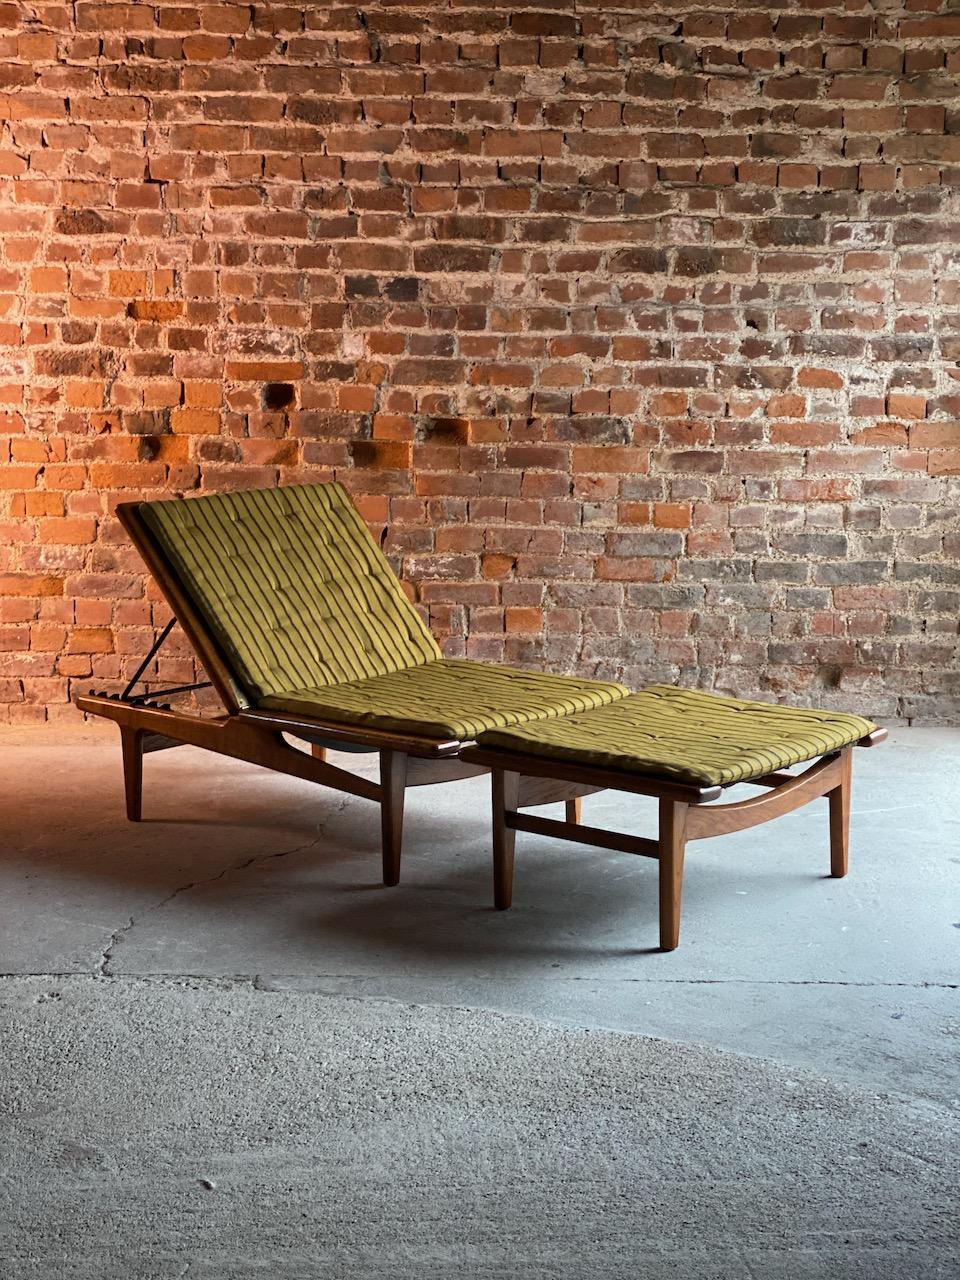 Hans Wegner model GE1 daybed for GETAMA, Denmark, circa 1954

Hans J Wegner model GE1 daybed for GETAMA, Denmark, circa 1954, this original solid oak two sectional daybed is a beautiful, practical and versatile piece of furniture, the backrest can